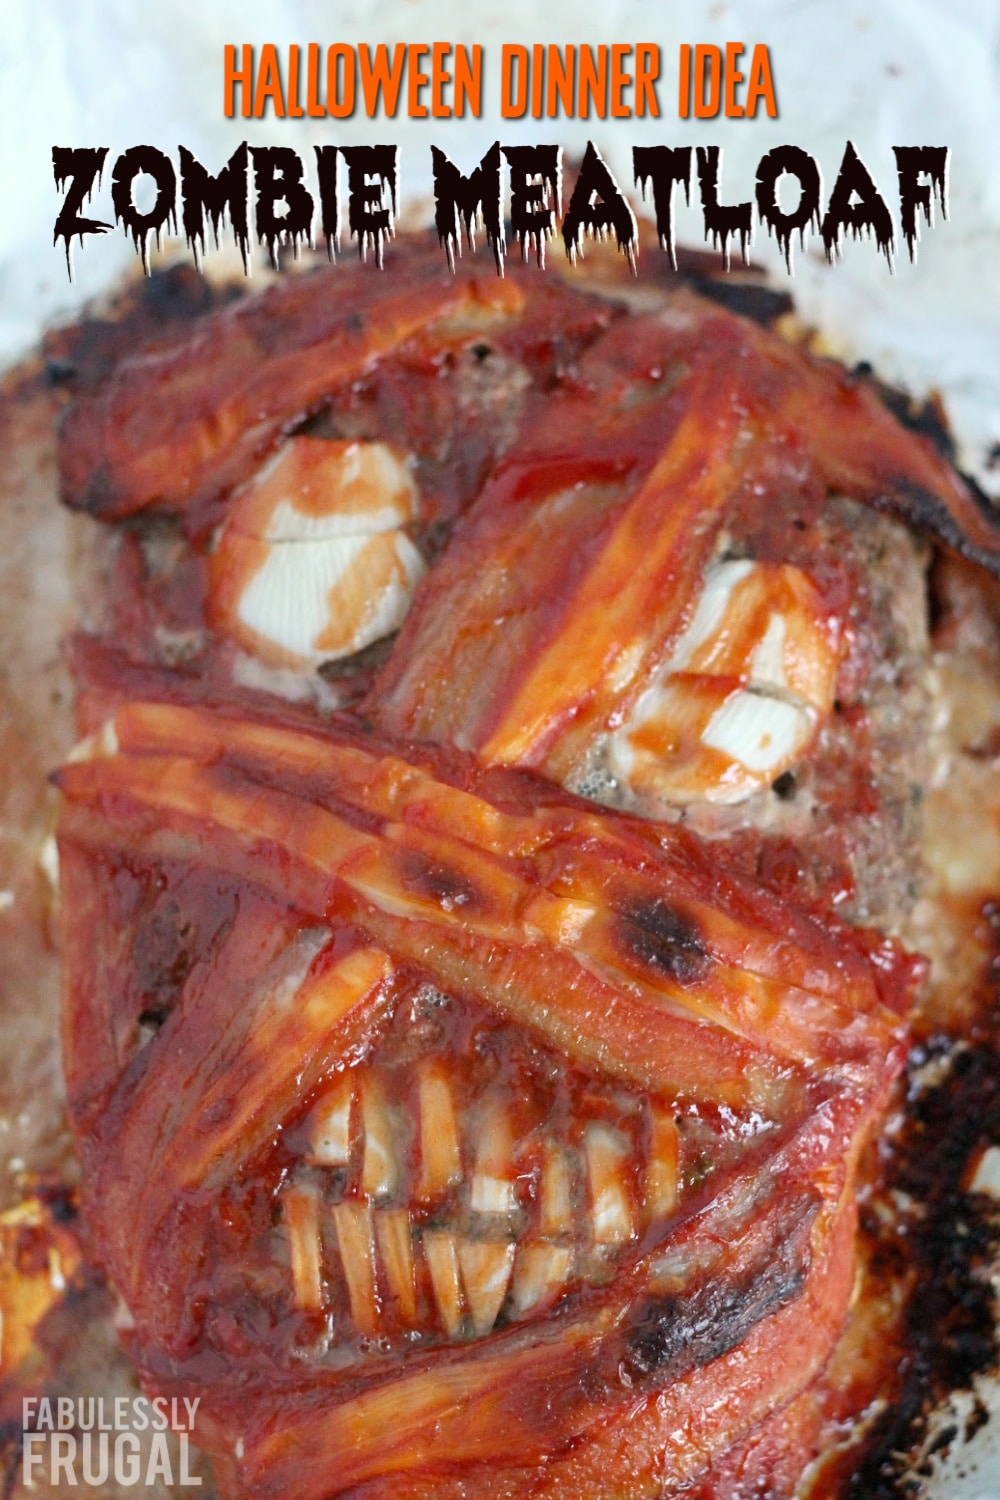 Scary Zombie meatloaf recipe for Halloween dinner